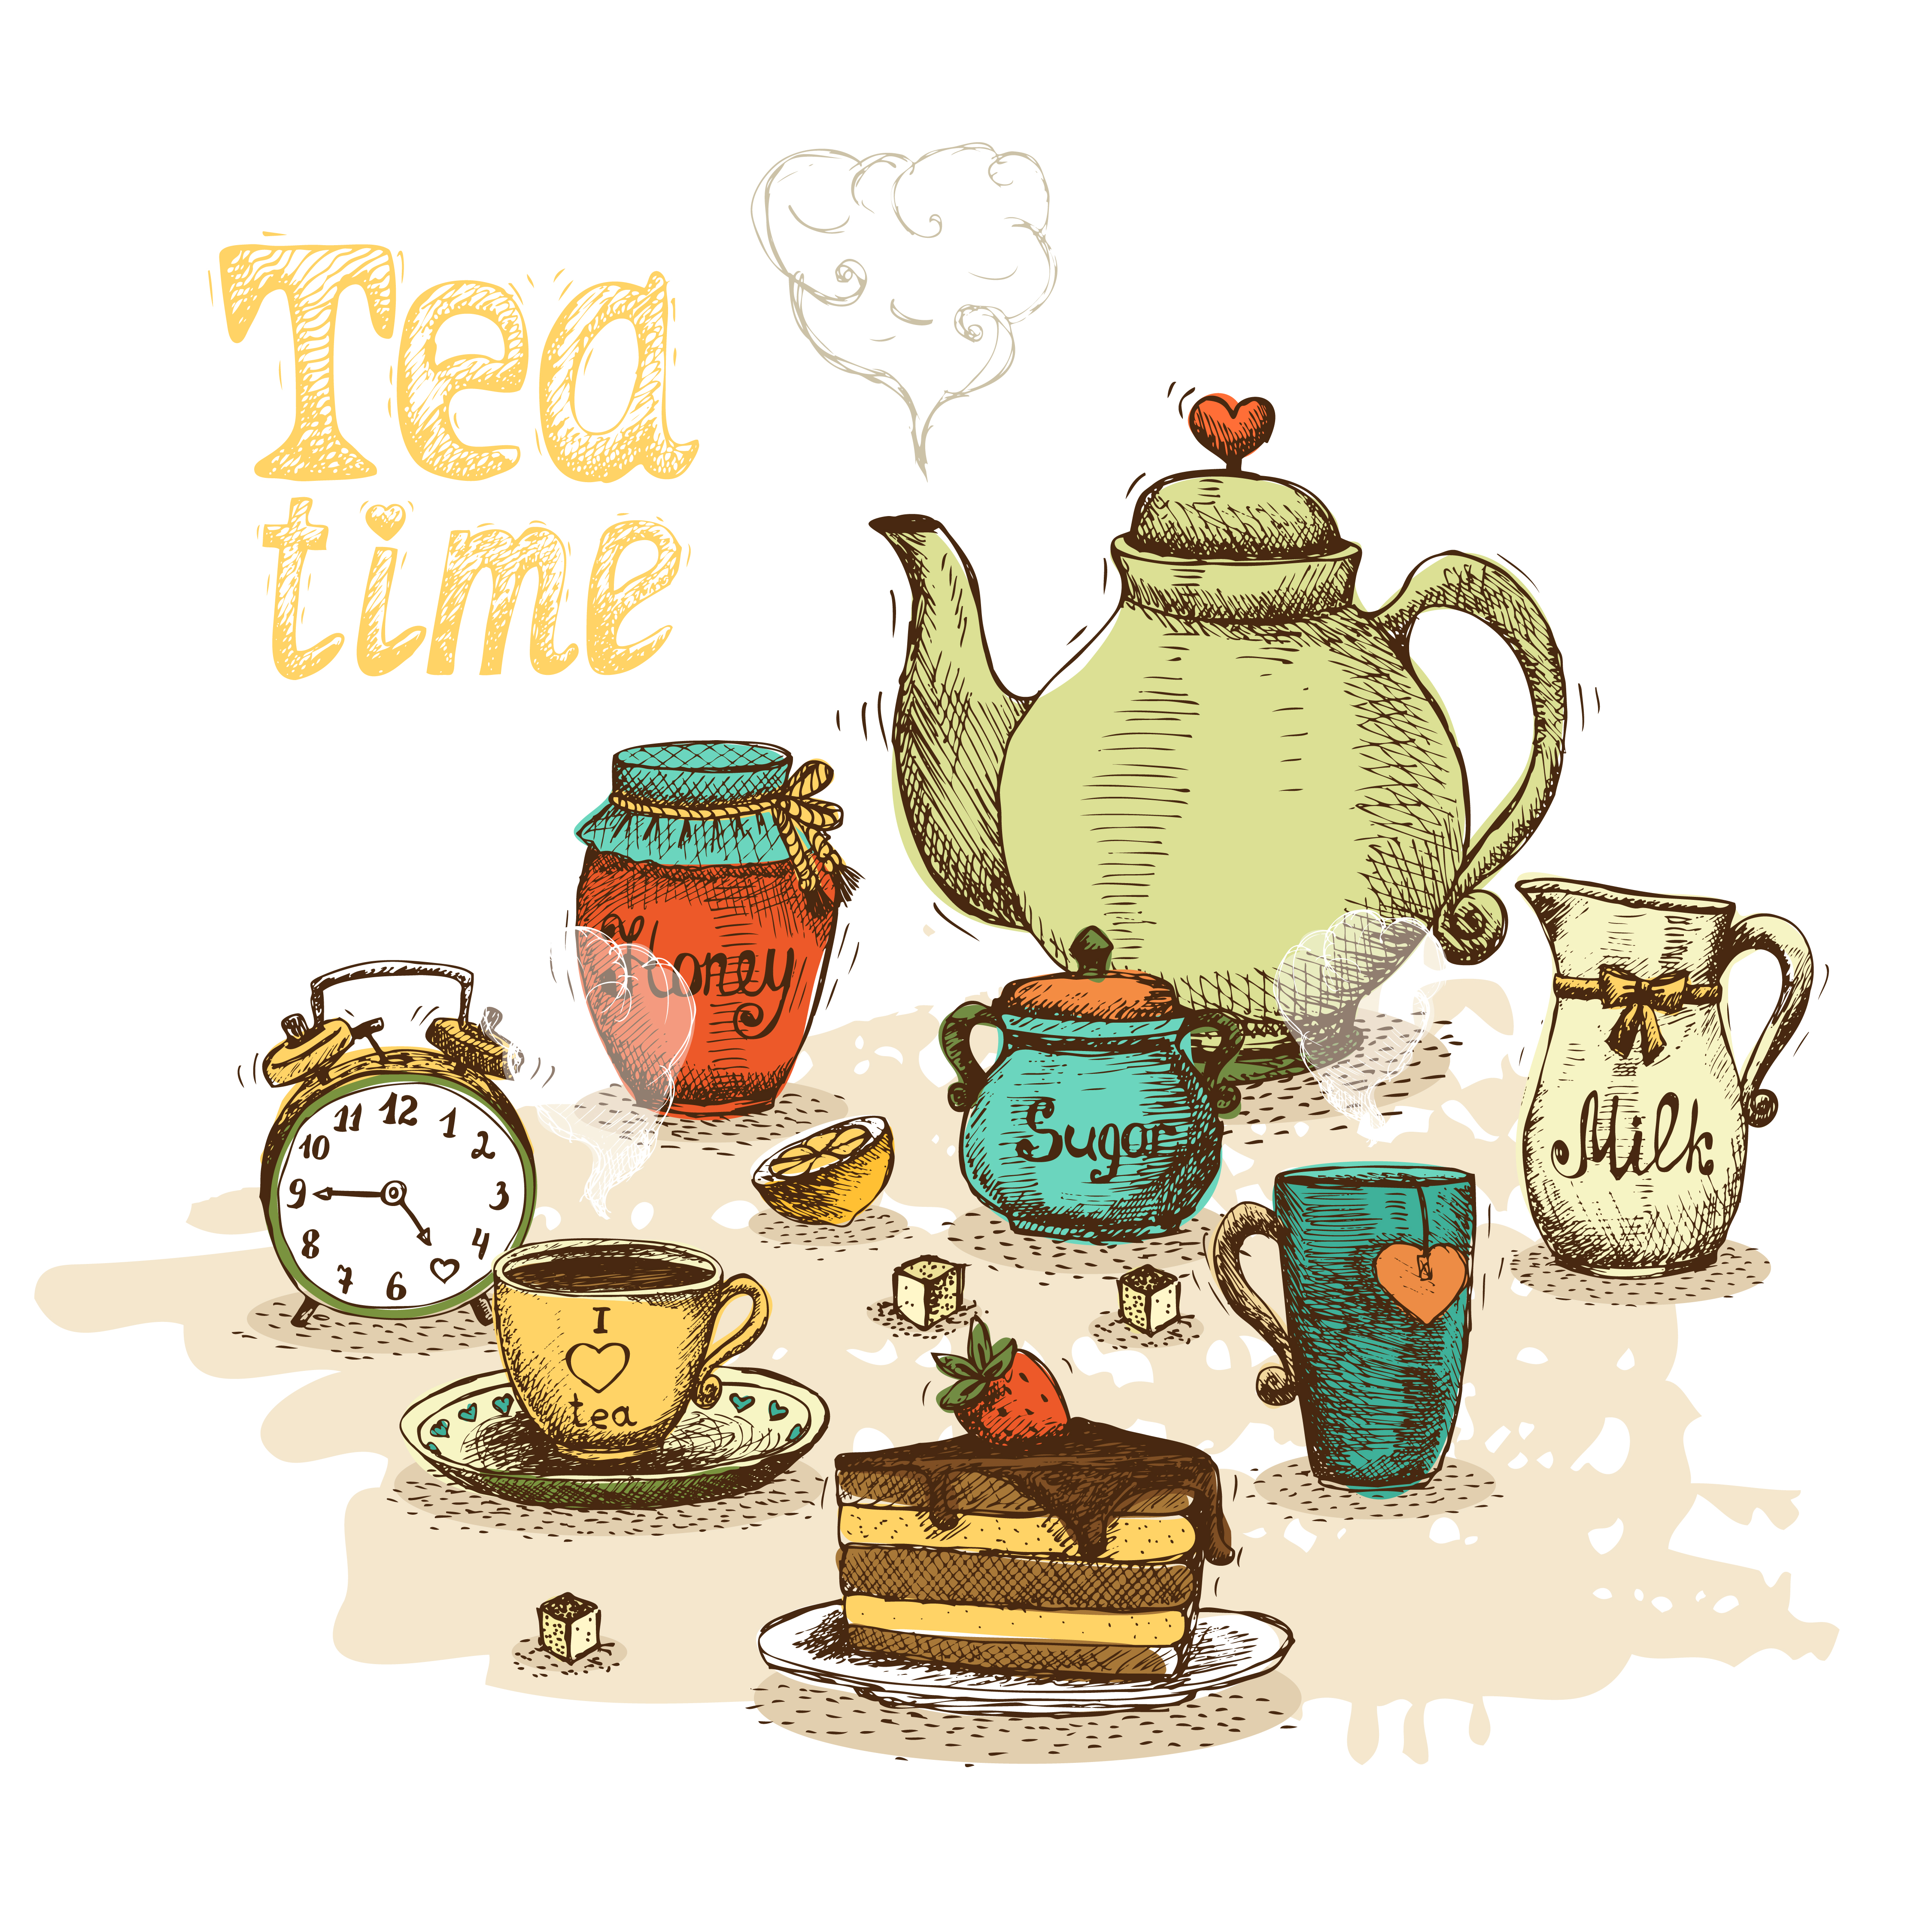 Animated image of a teapot surrounded by tea cups and cake with words which read tea time